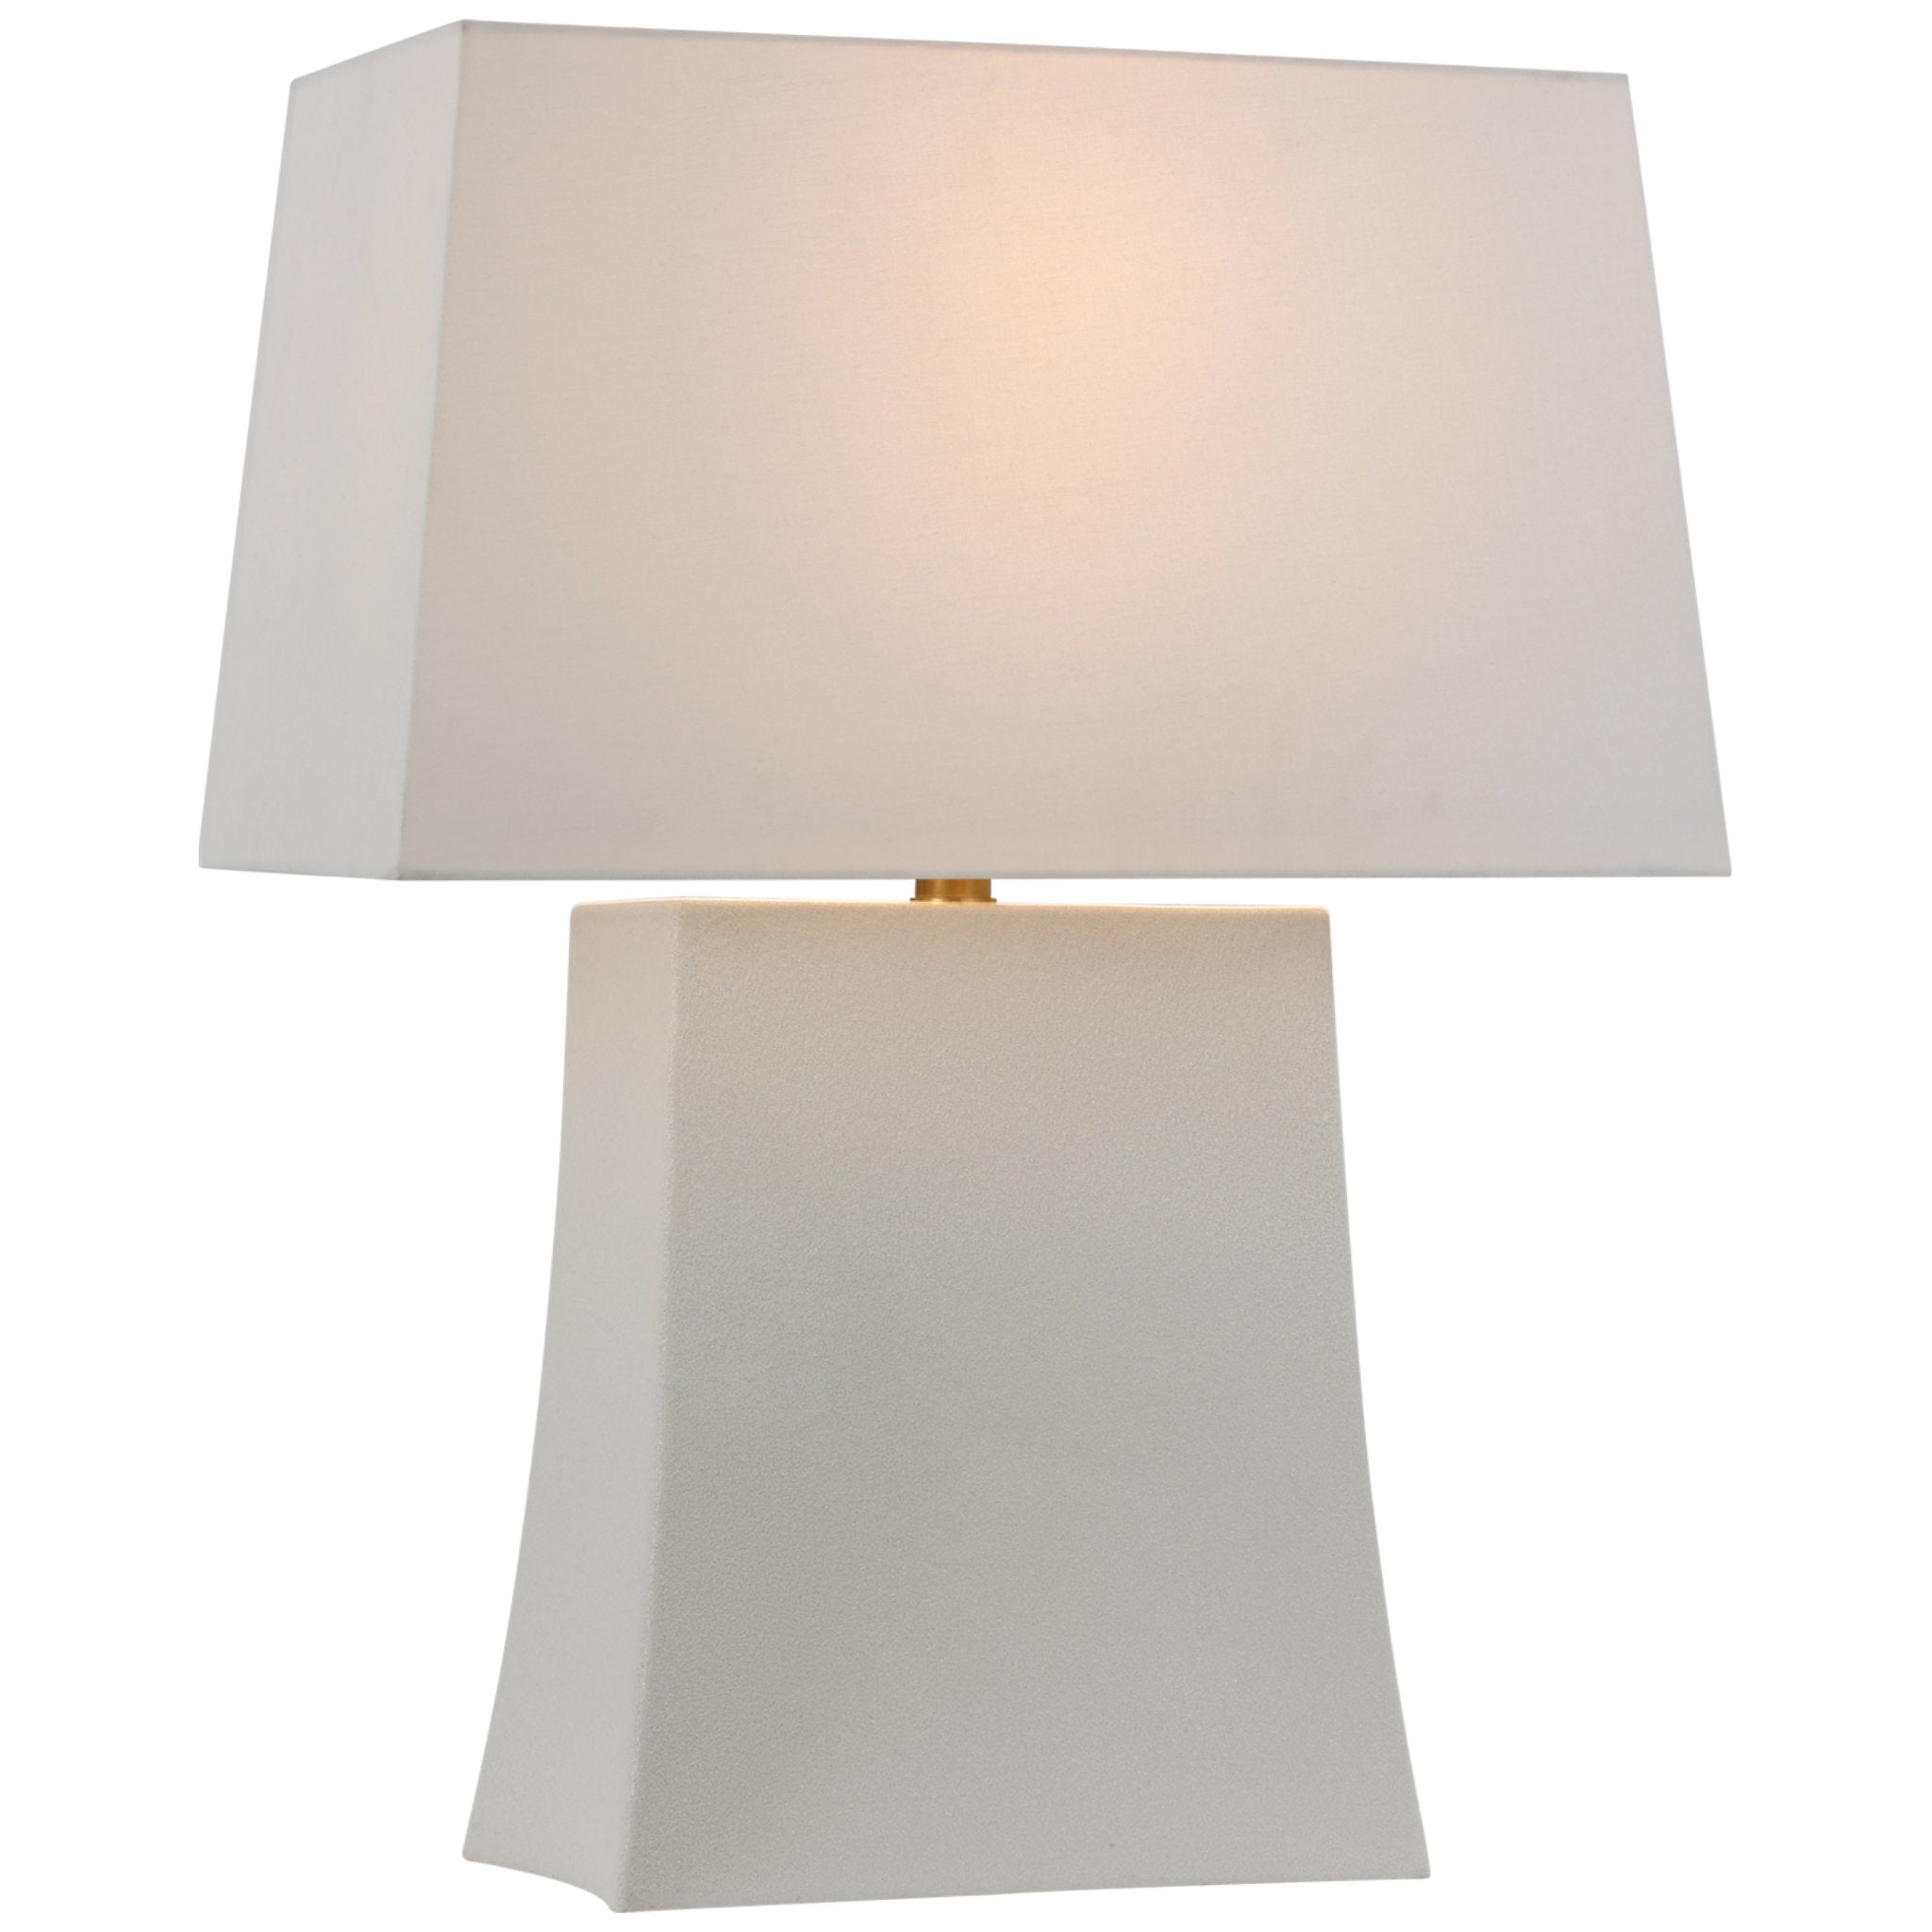 Chapman & Myers Lucera Medium Table Lamp in Porous White with Linen Shade